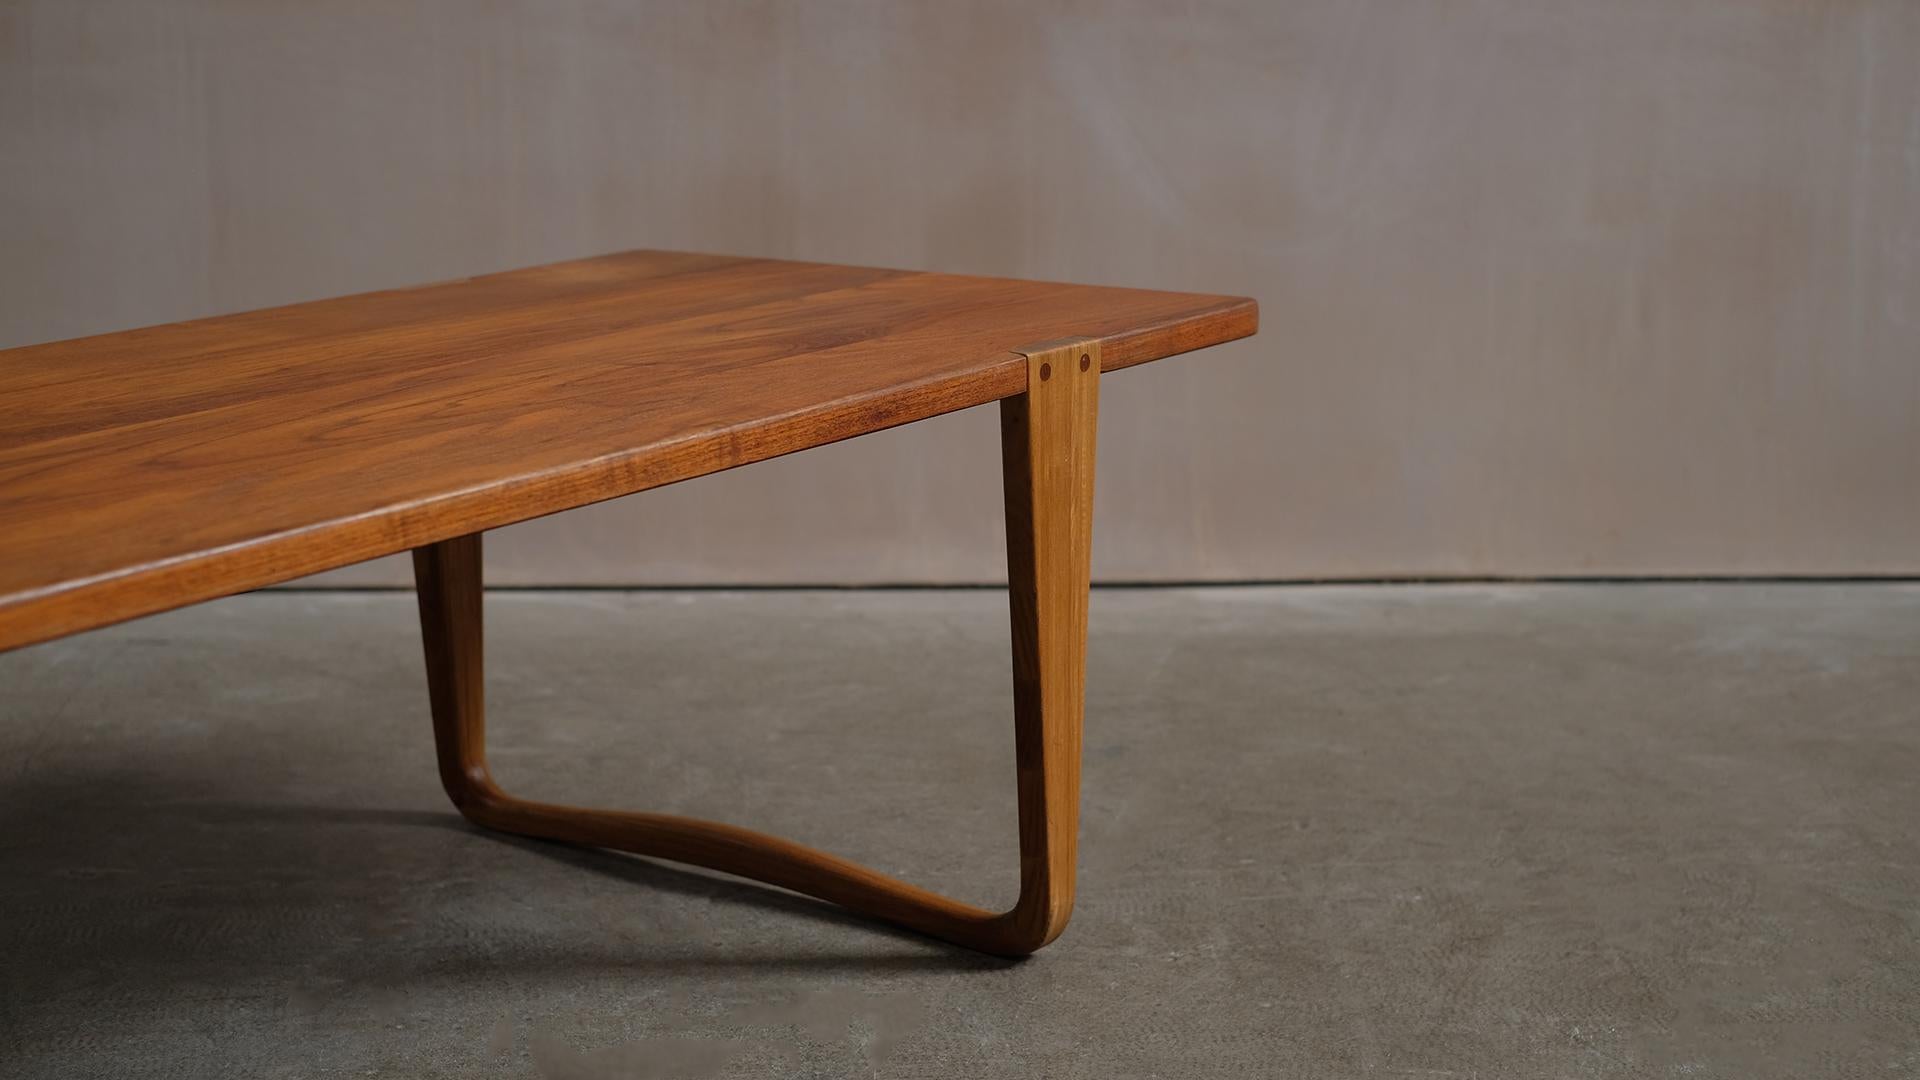 20th Century Solid teak and Ash Table / Bench by Michael Bloch